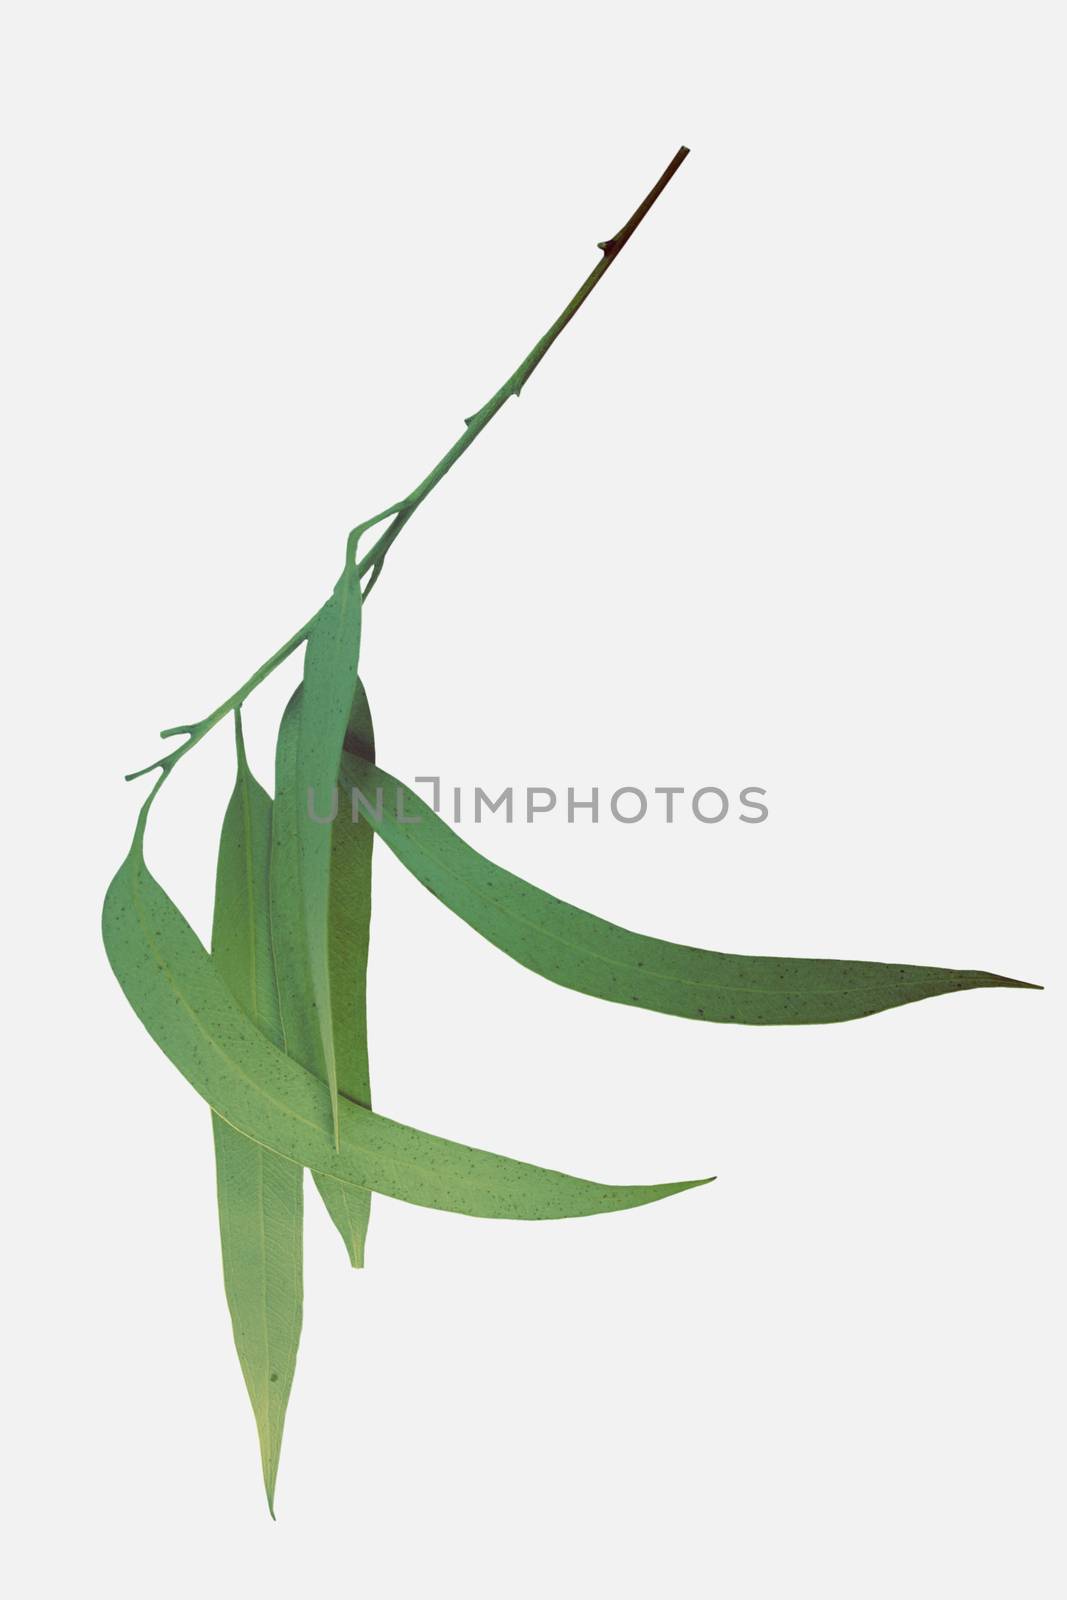 Leaves of Corymbia citriodora, Lemon Scented Gum by yands